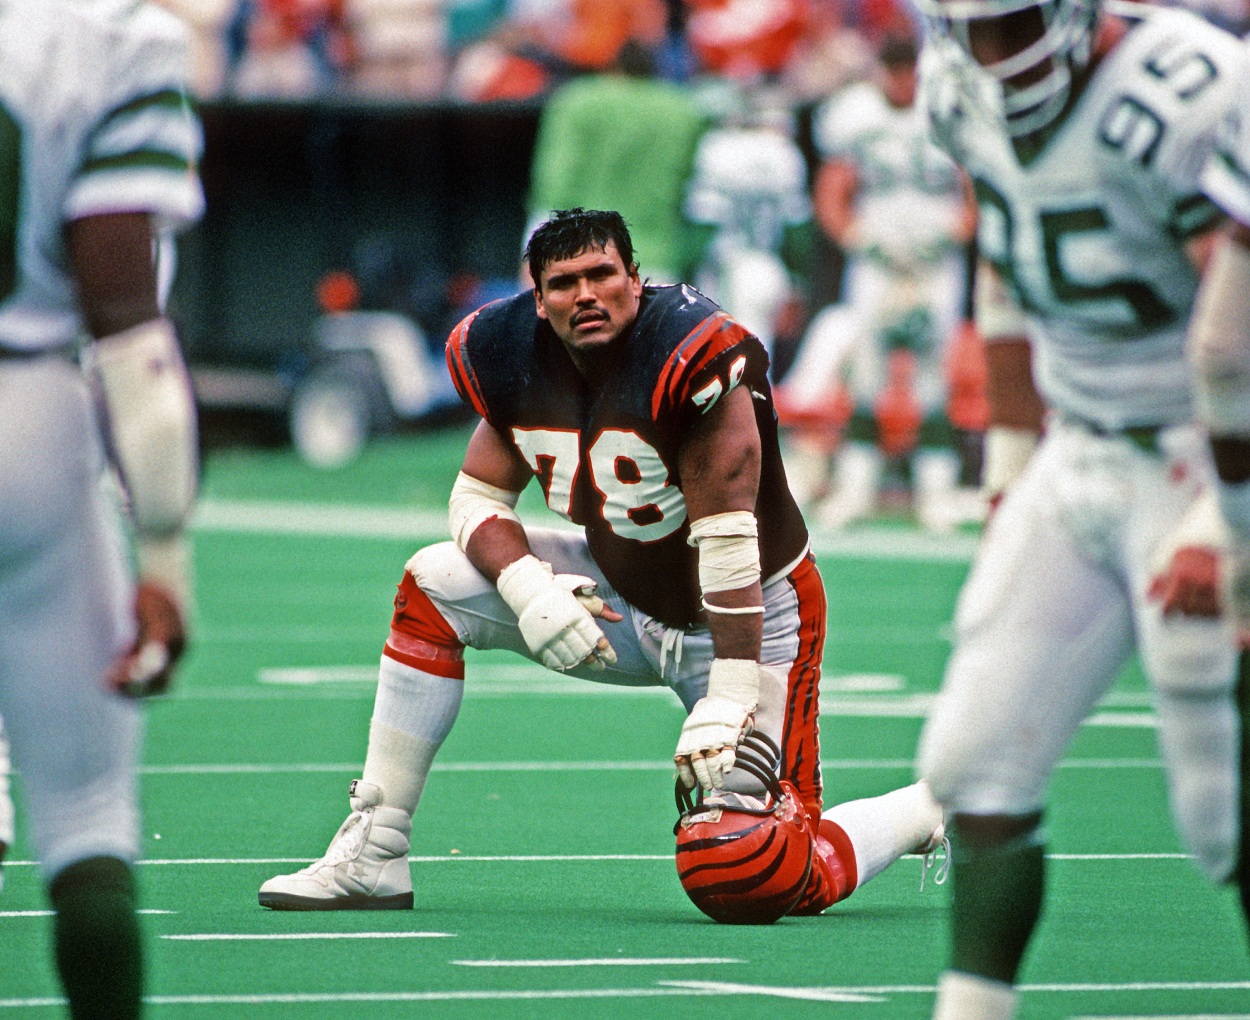 Offensive lineman Anthony Munoz of the Cincinnati Bengals looks on from the field.